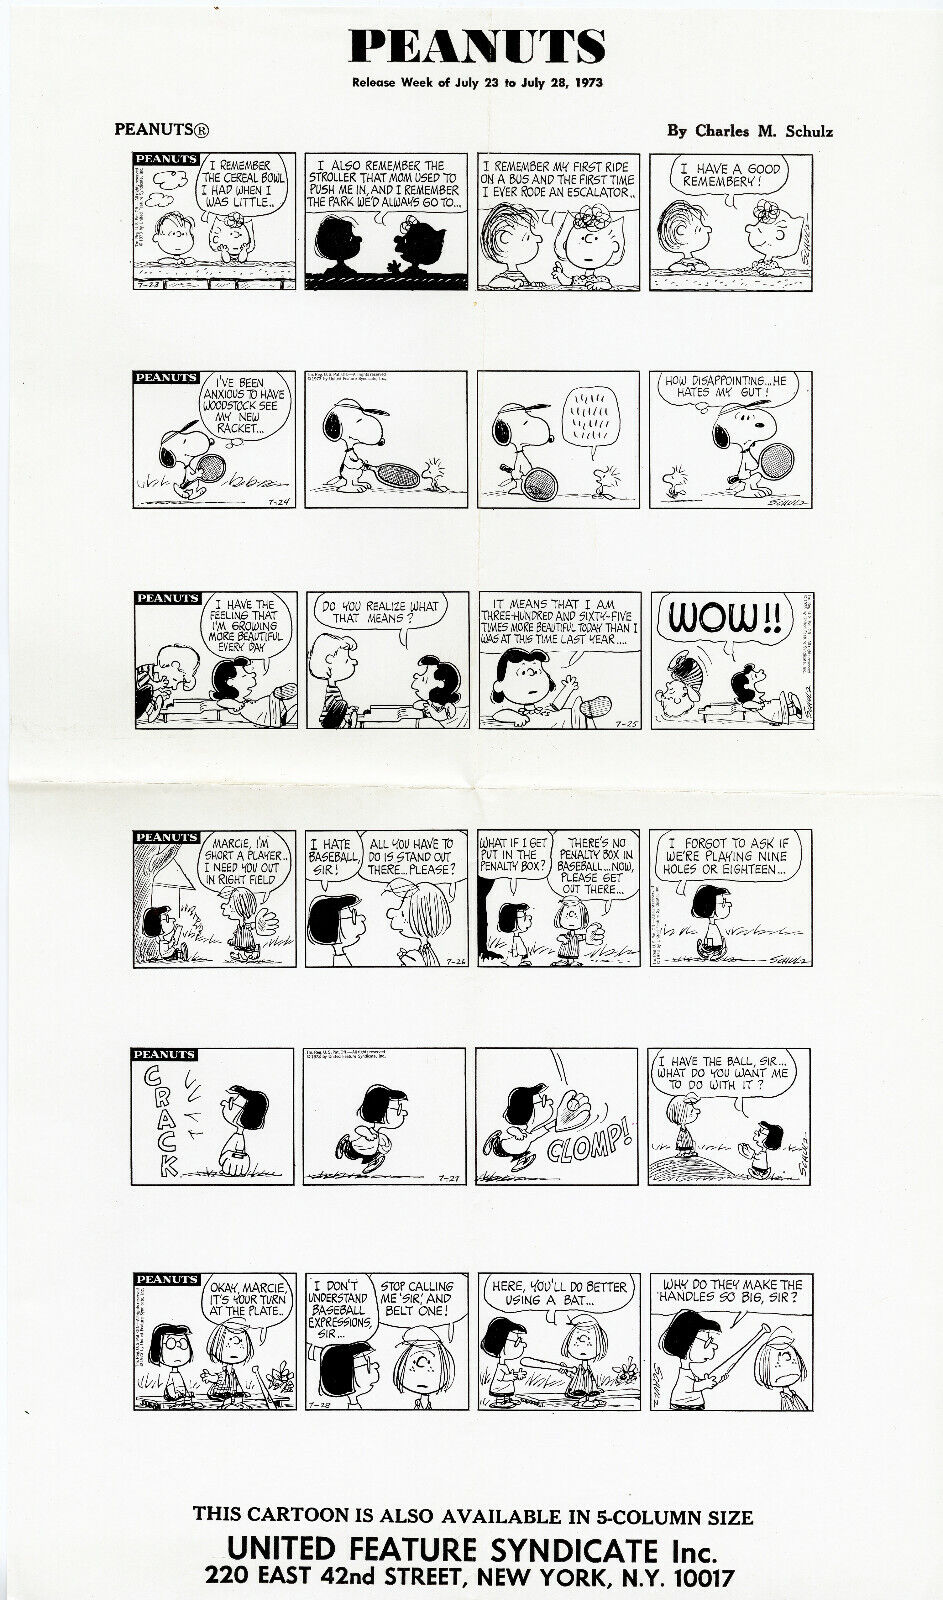 6 Daily Peanuts Strips by Charles Schulz July 23 to July 28 1973 Photostat Print